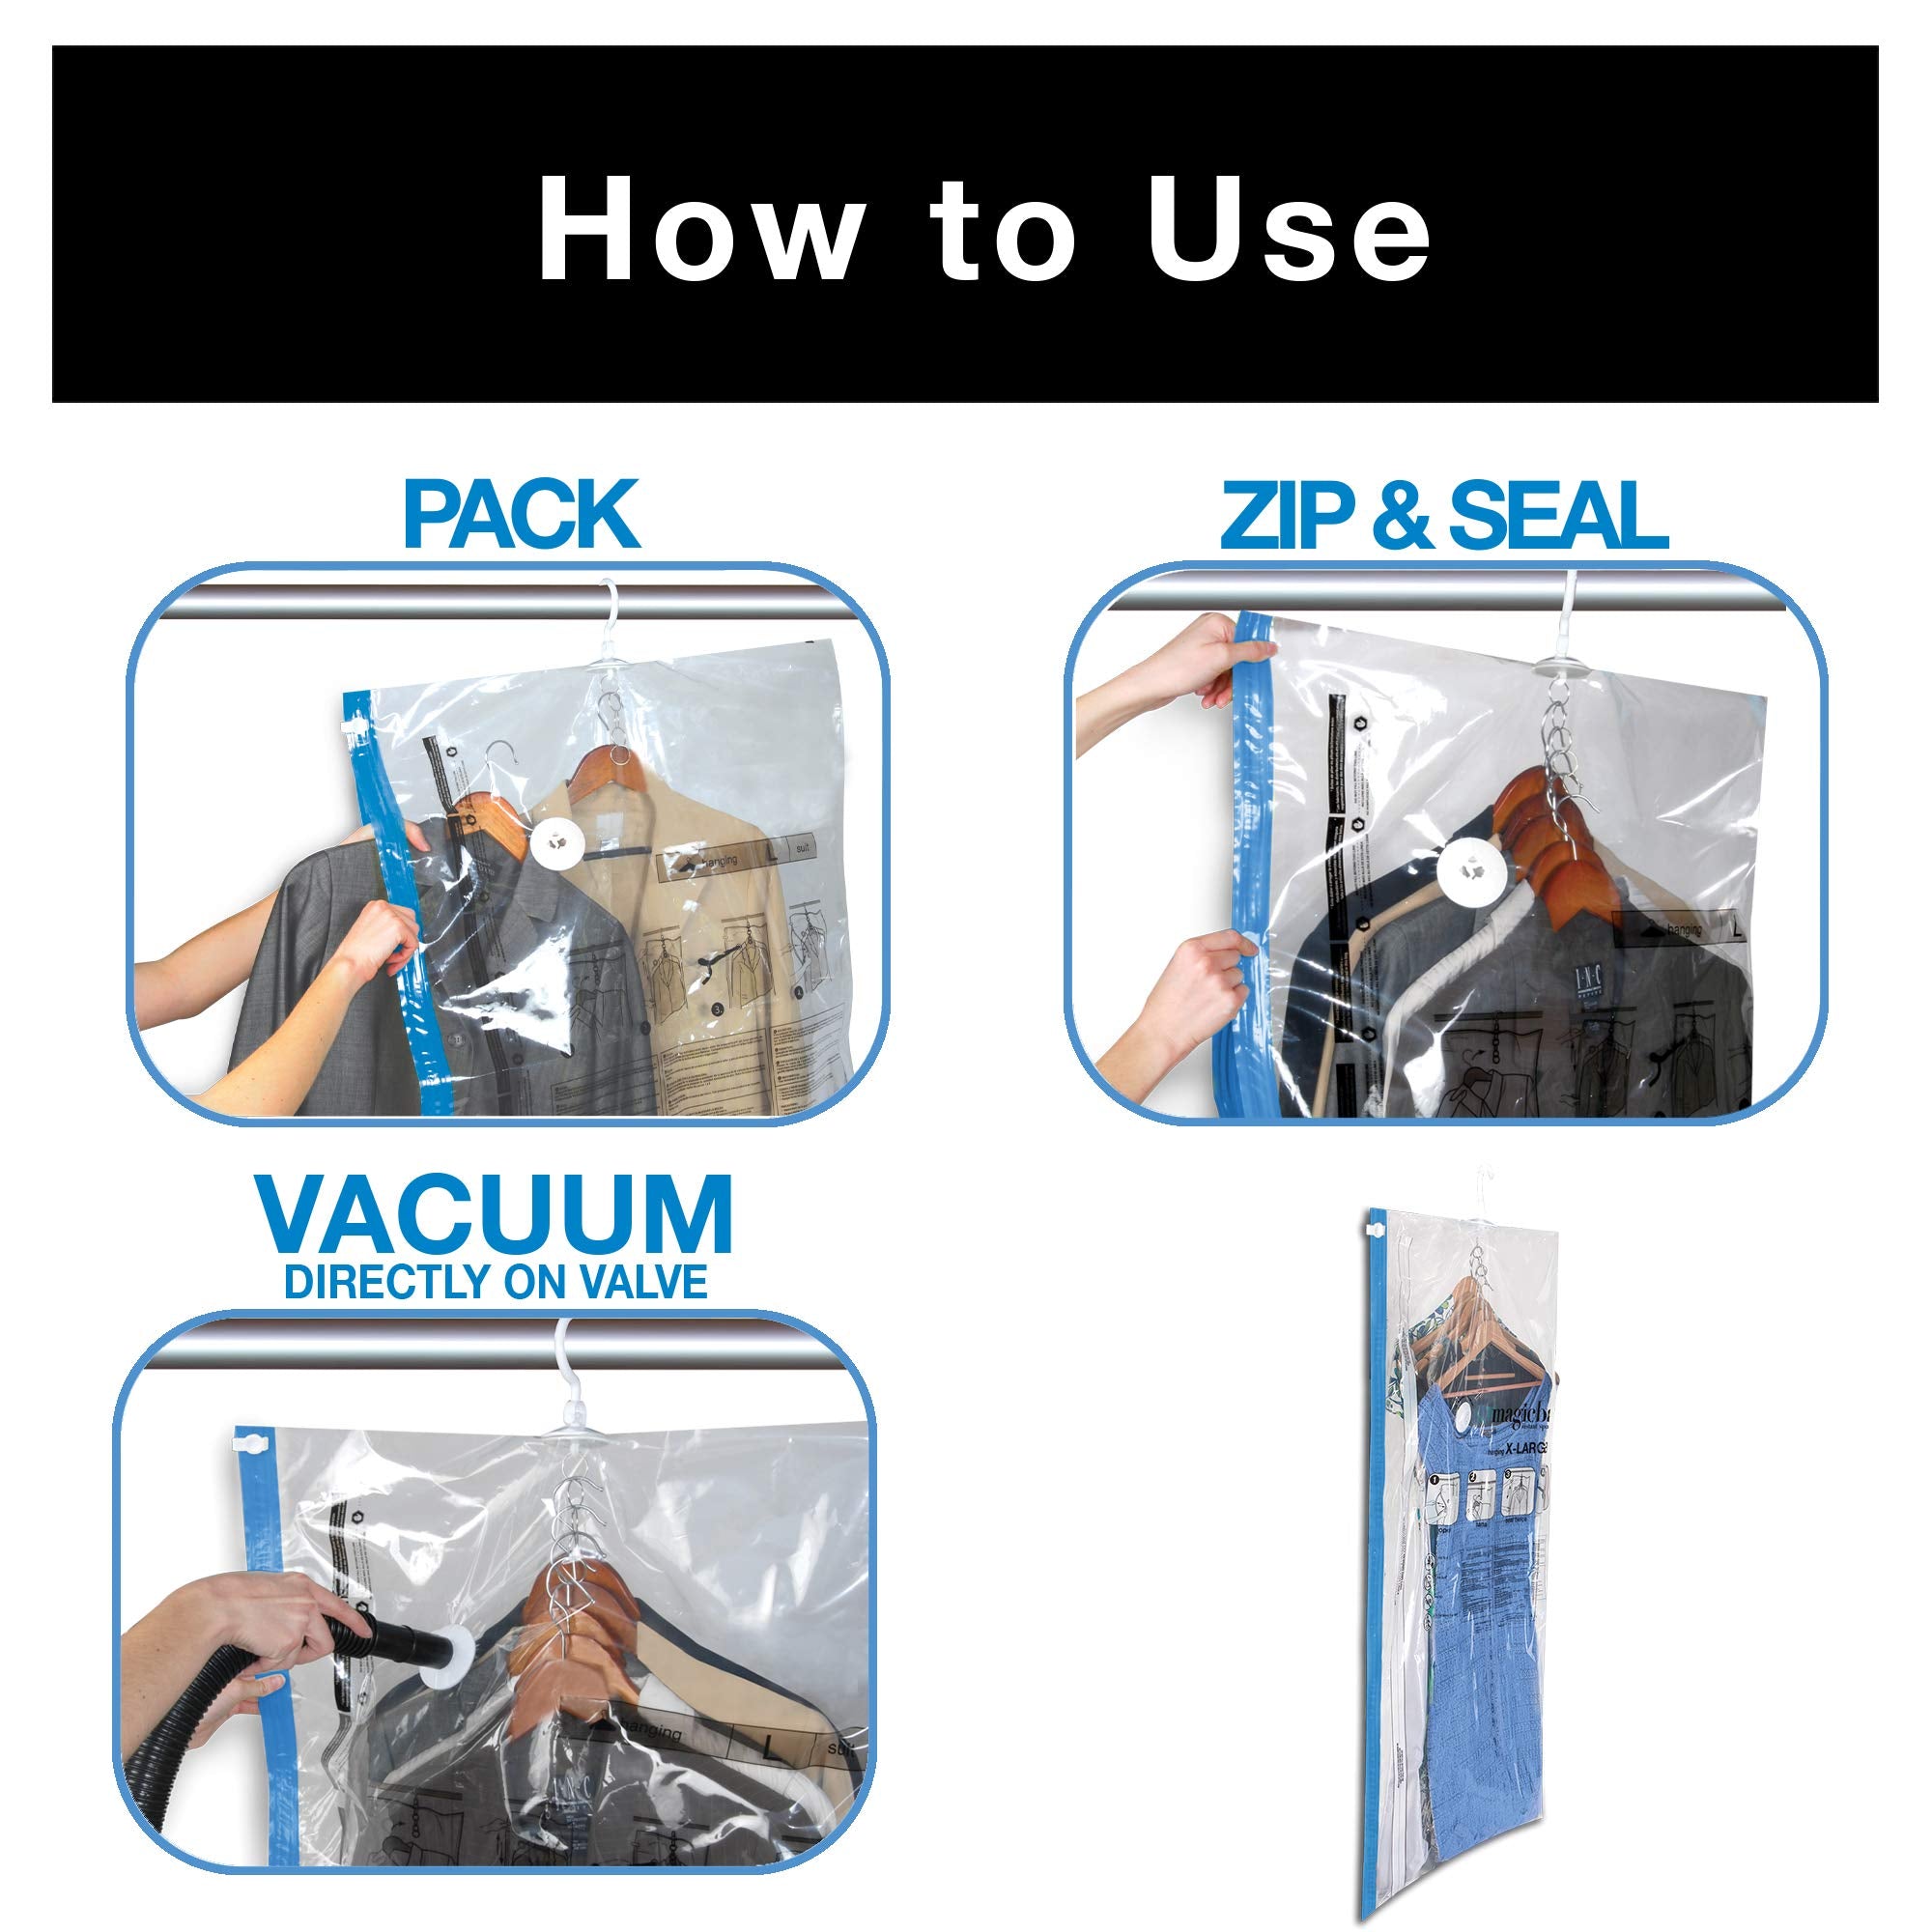 Magicbag Smart Design Instant Space Saver Storage - Combo Flat - Set of 8 Bags Total